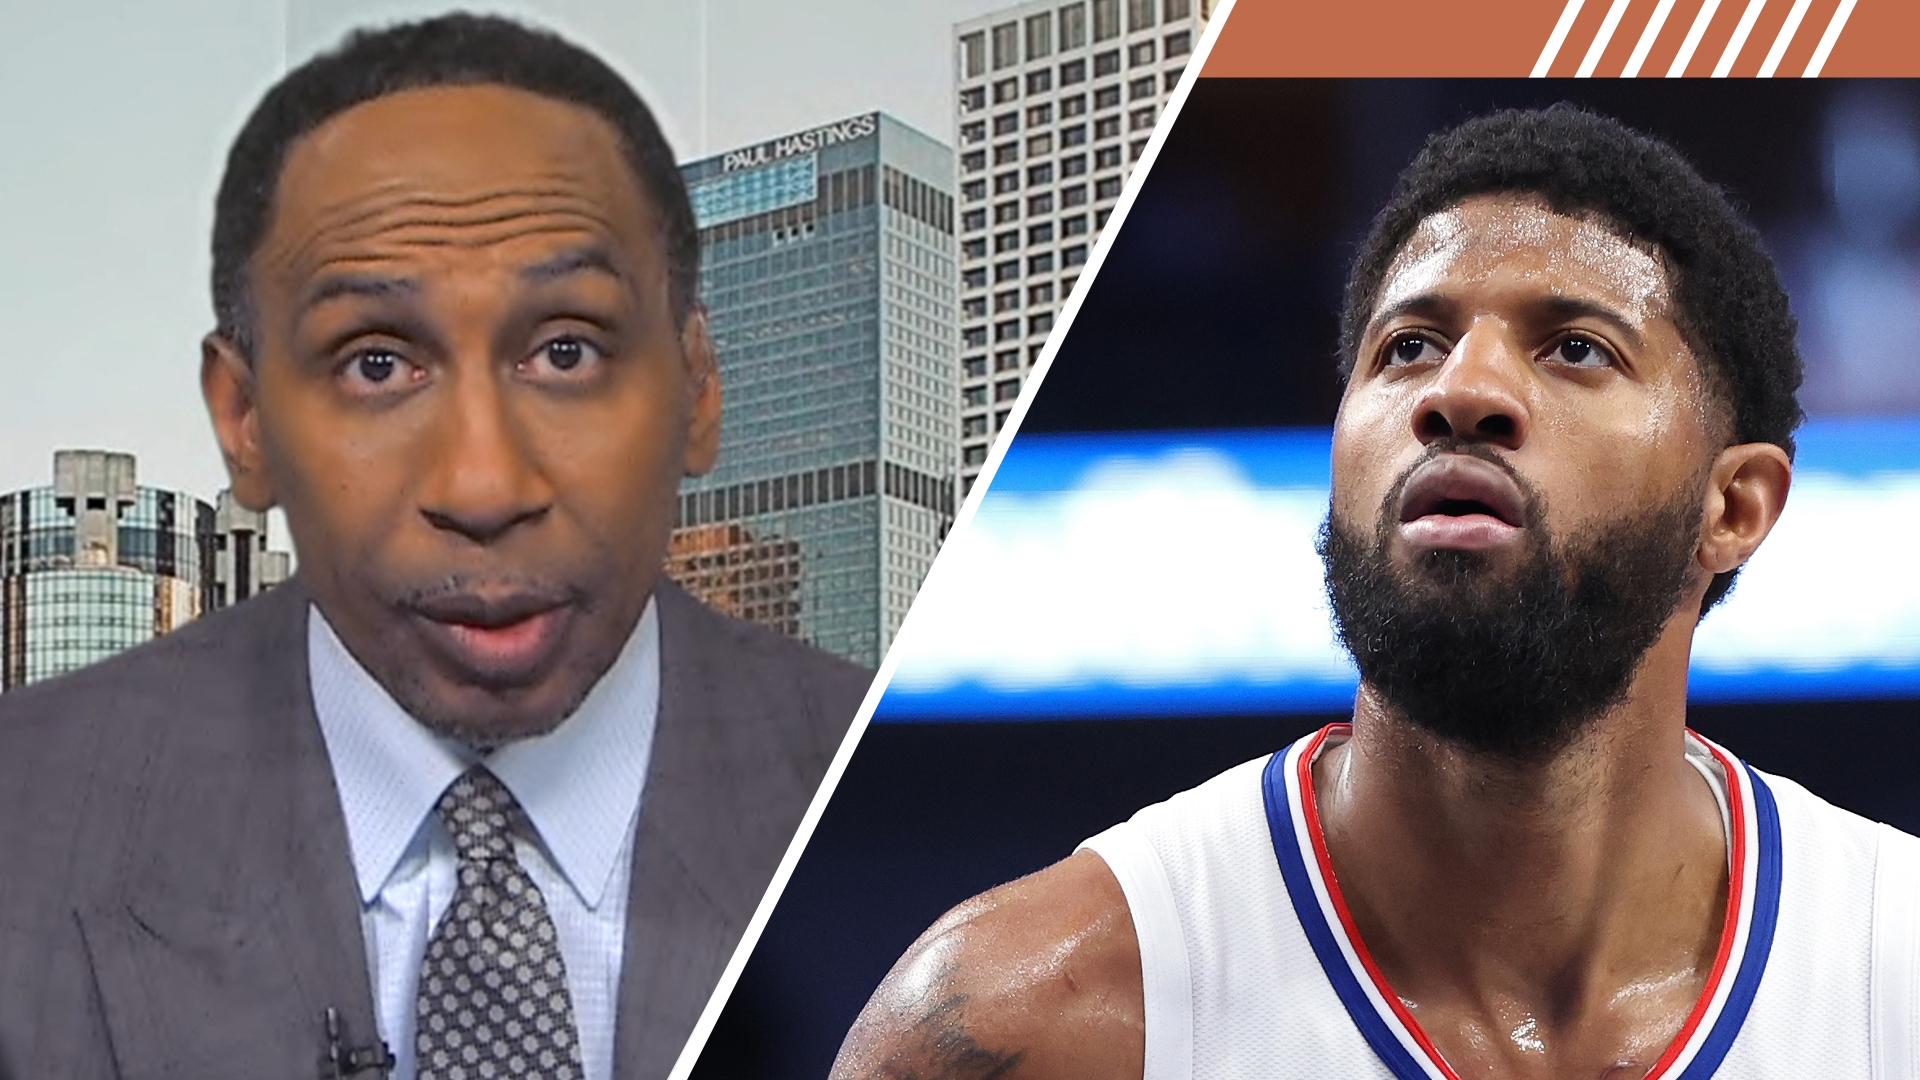 Stephen A. condemns Clippers' Game 5 performance